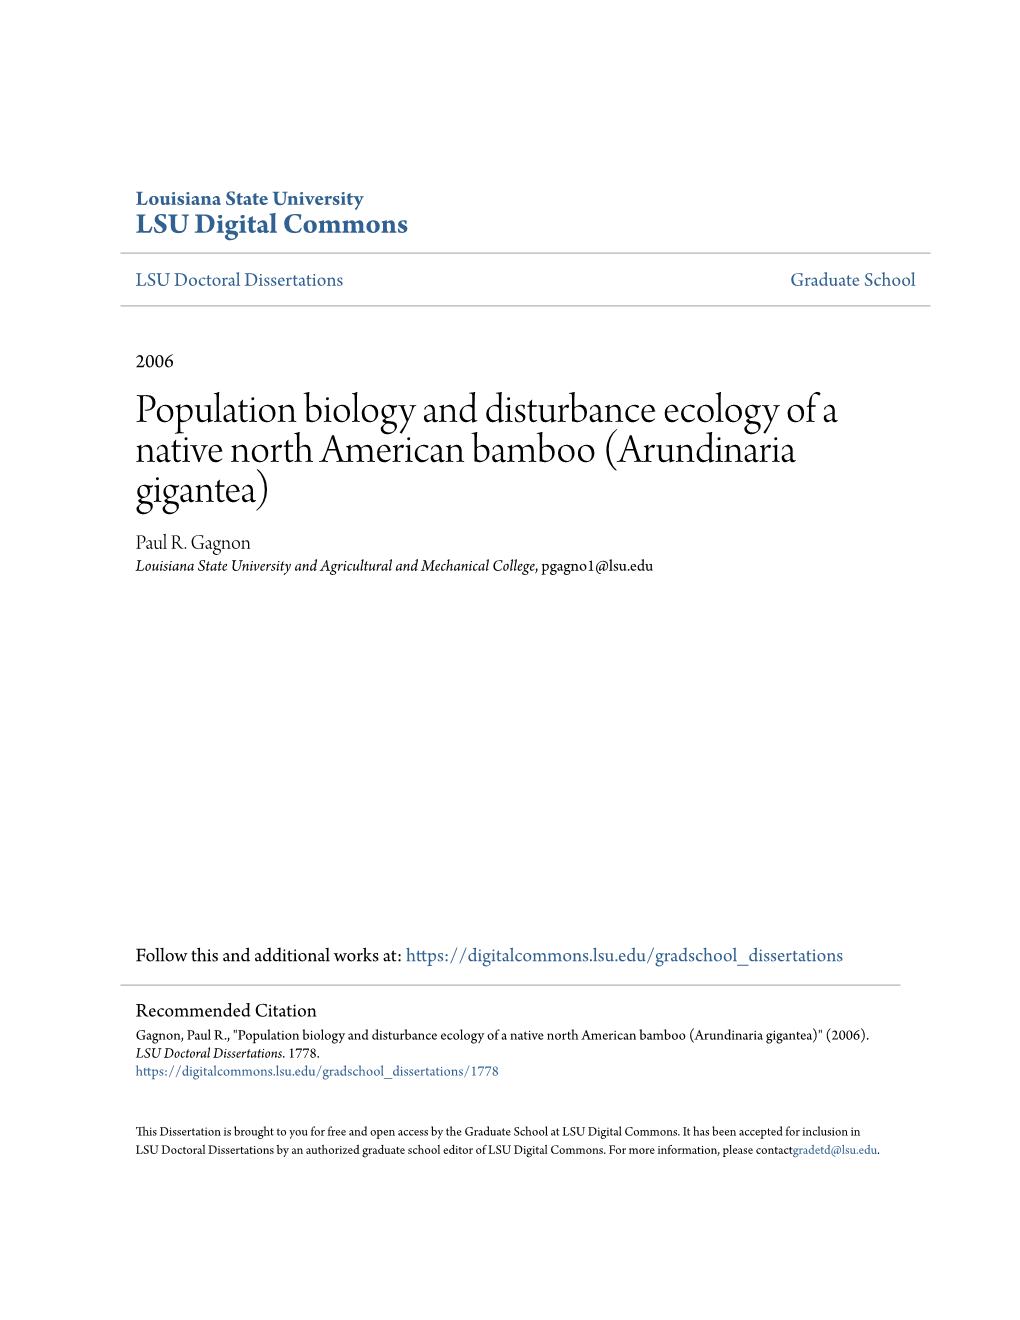 Population Biology and Disturbance Ecology of a Native North American Bamboo (Arundinaria Gigantea) Paul R